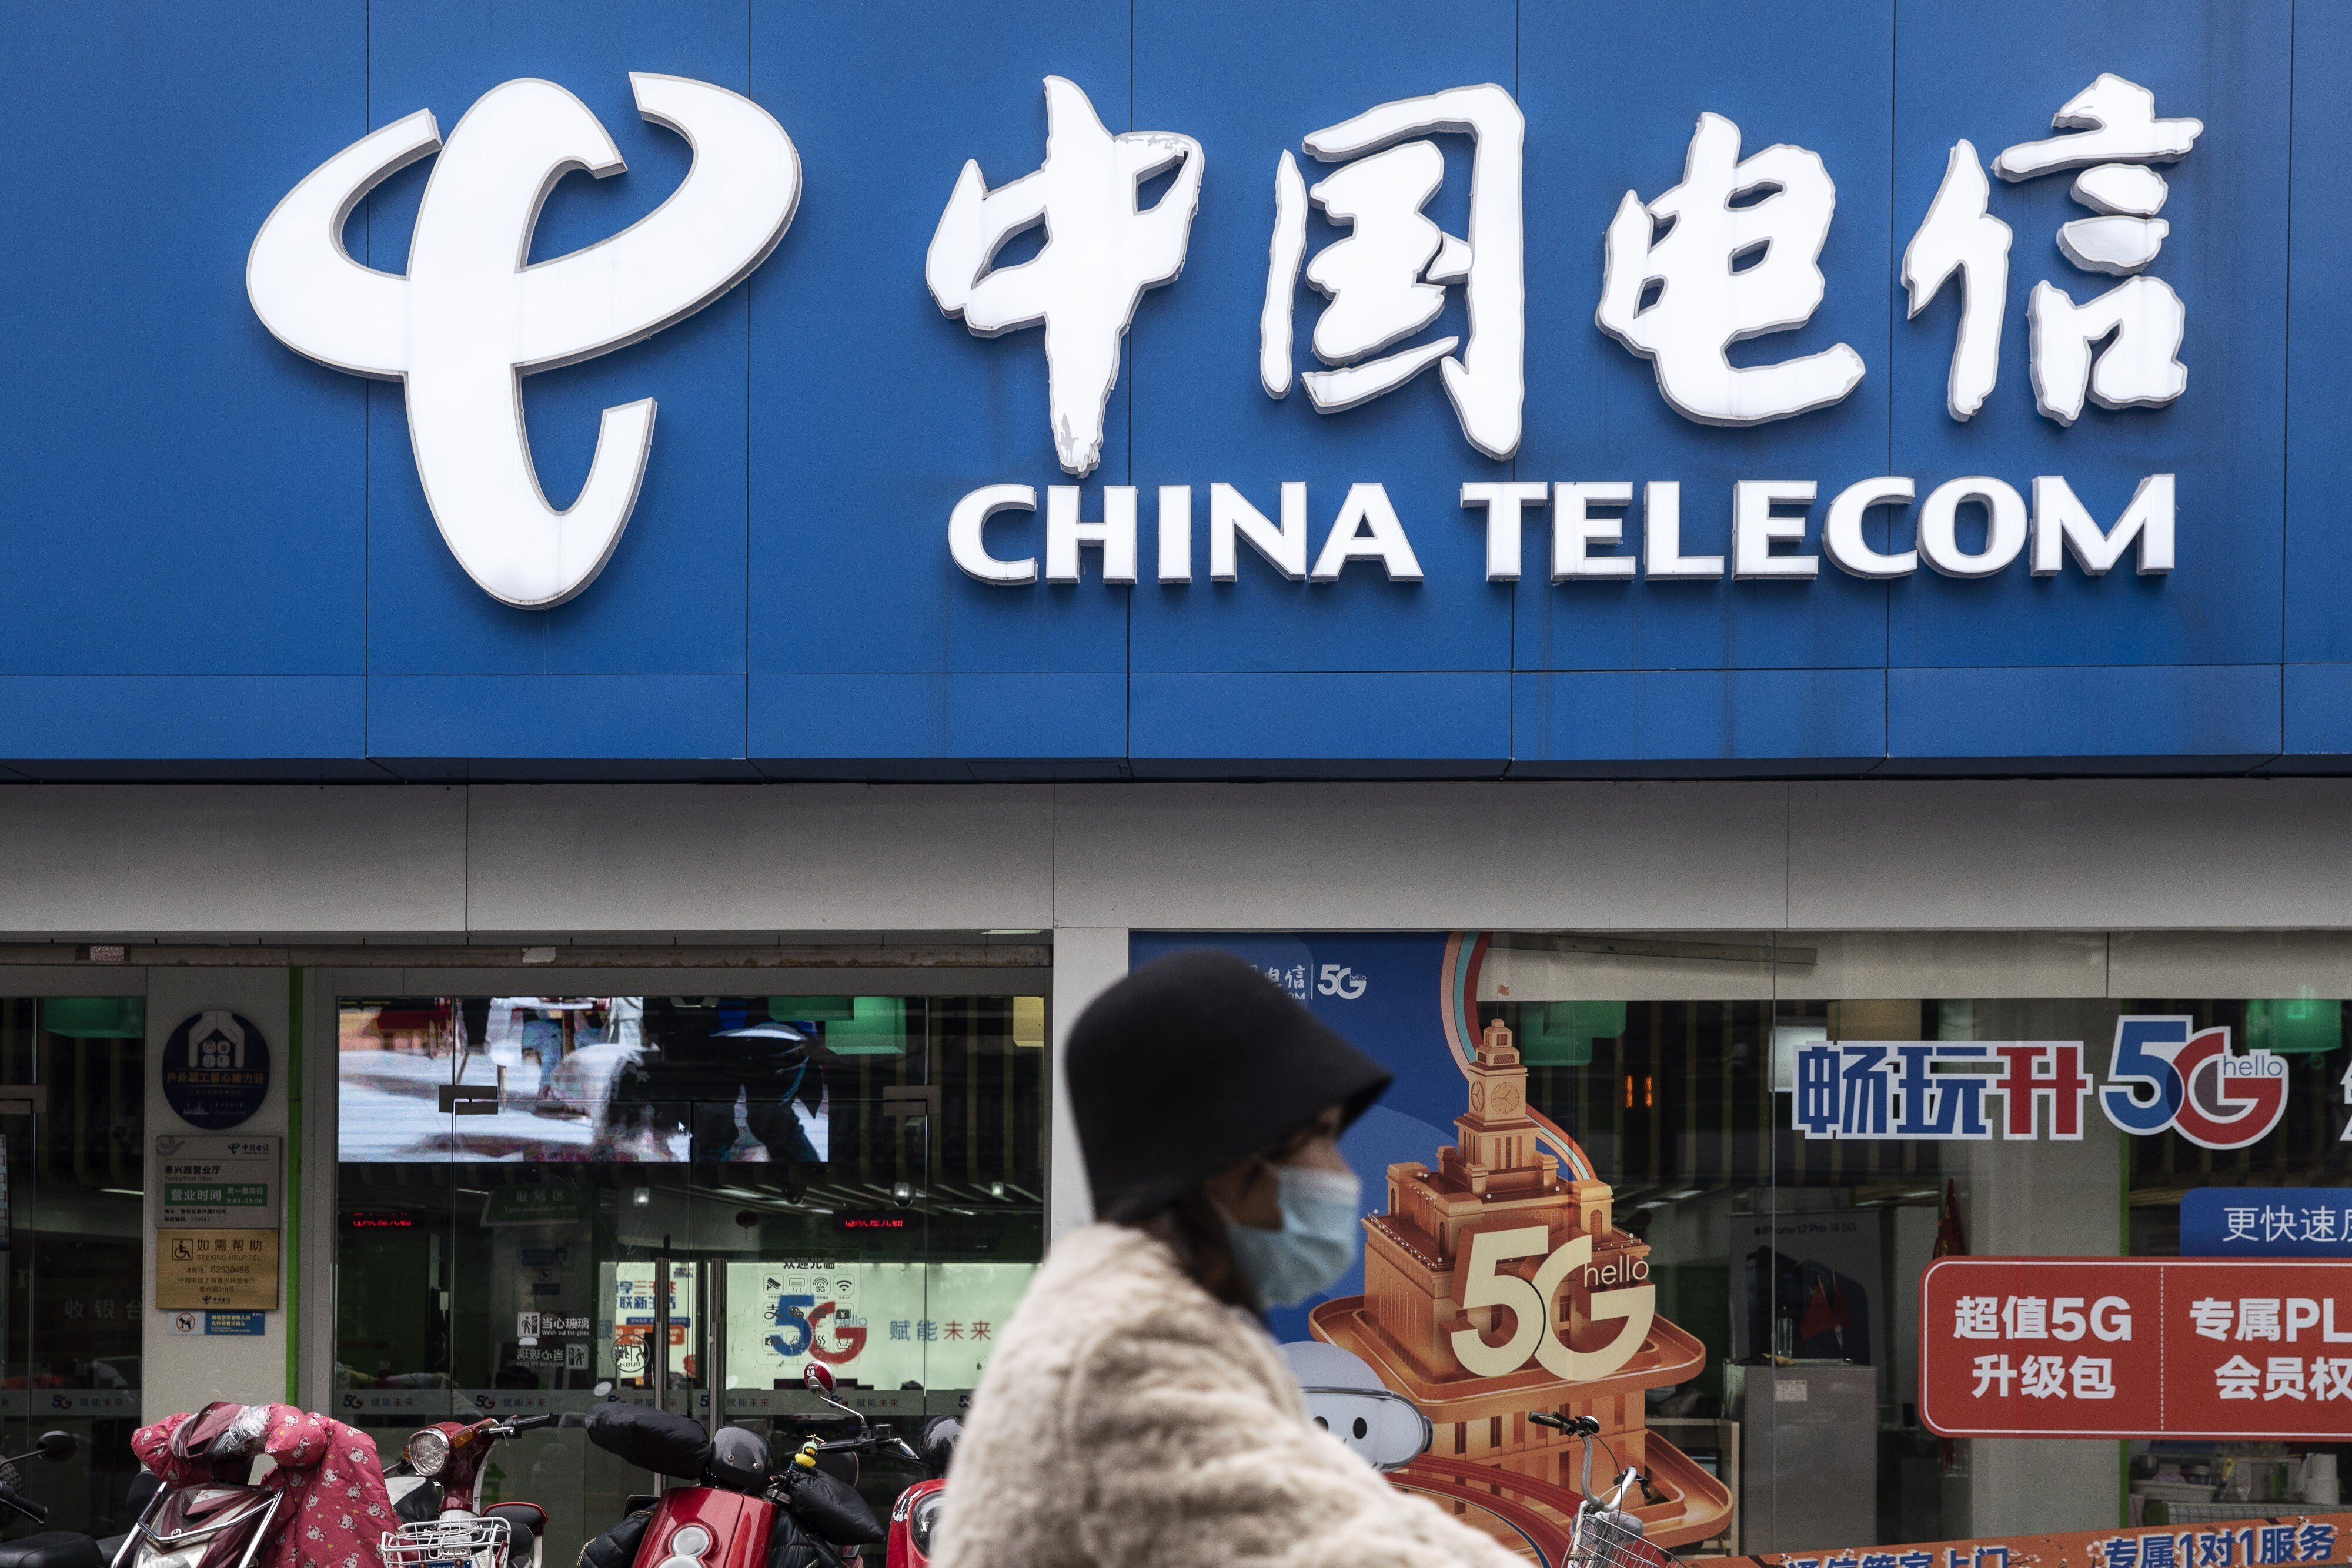 A motorist wearing a protective mask travels past a China Telecom Corp. store in Shanghai, China, on Wednesday, Jan. 6, 2021. Photo: Bloomberg